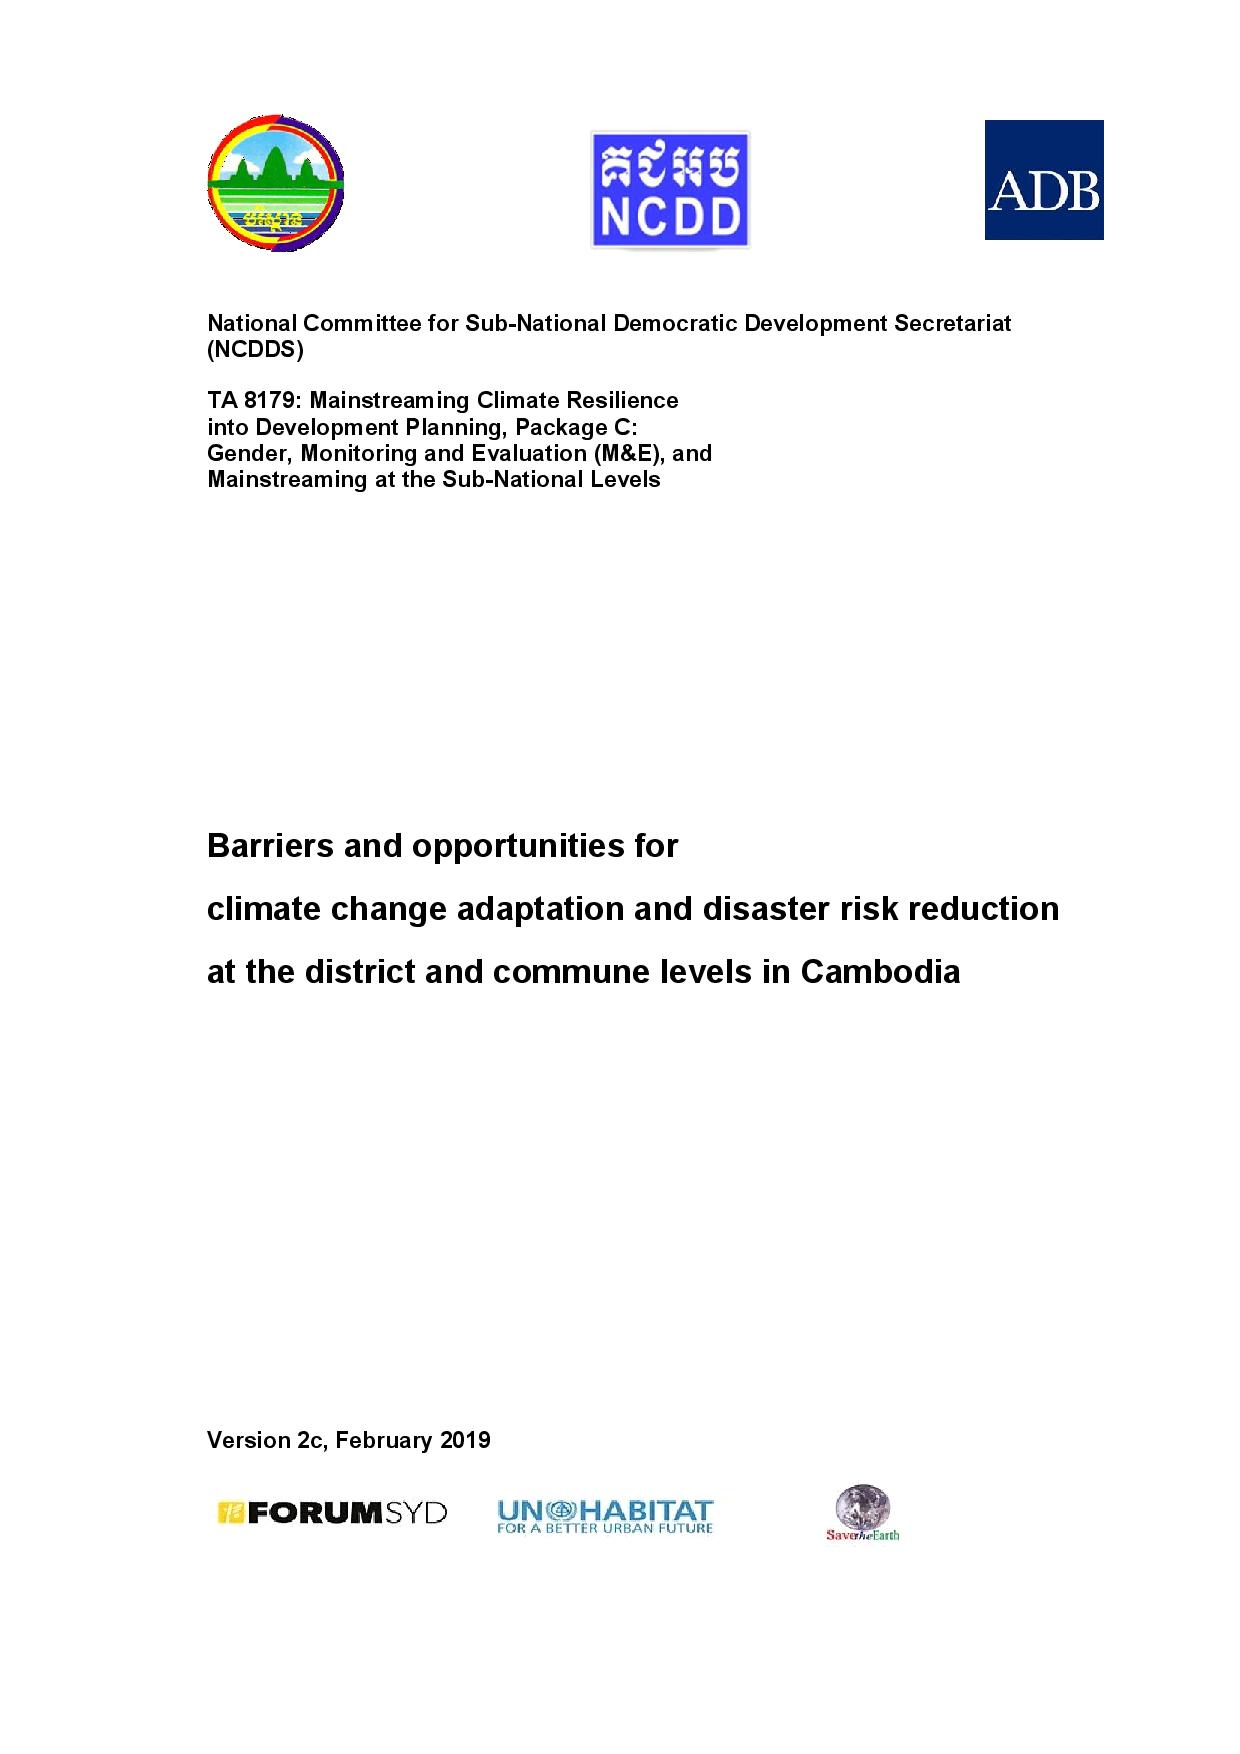 Barriers and Opportunities for Climate Change Adaptation and Disaster Risk Reduction at the District and Commune Levels in Cambodia